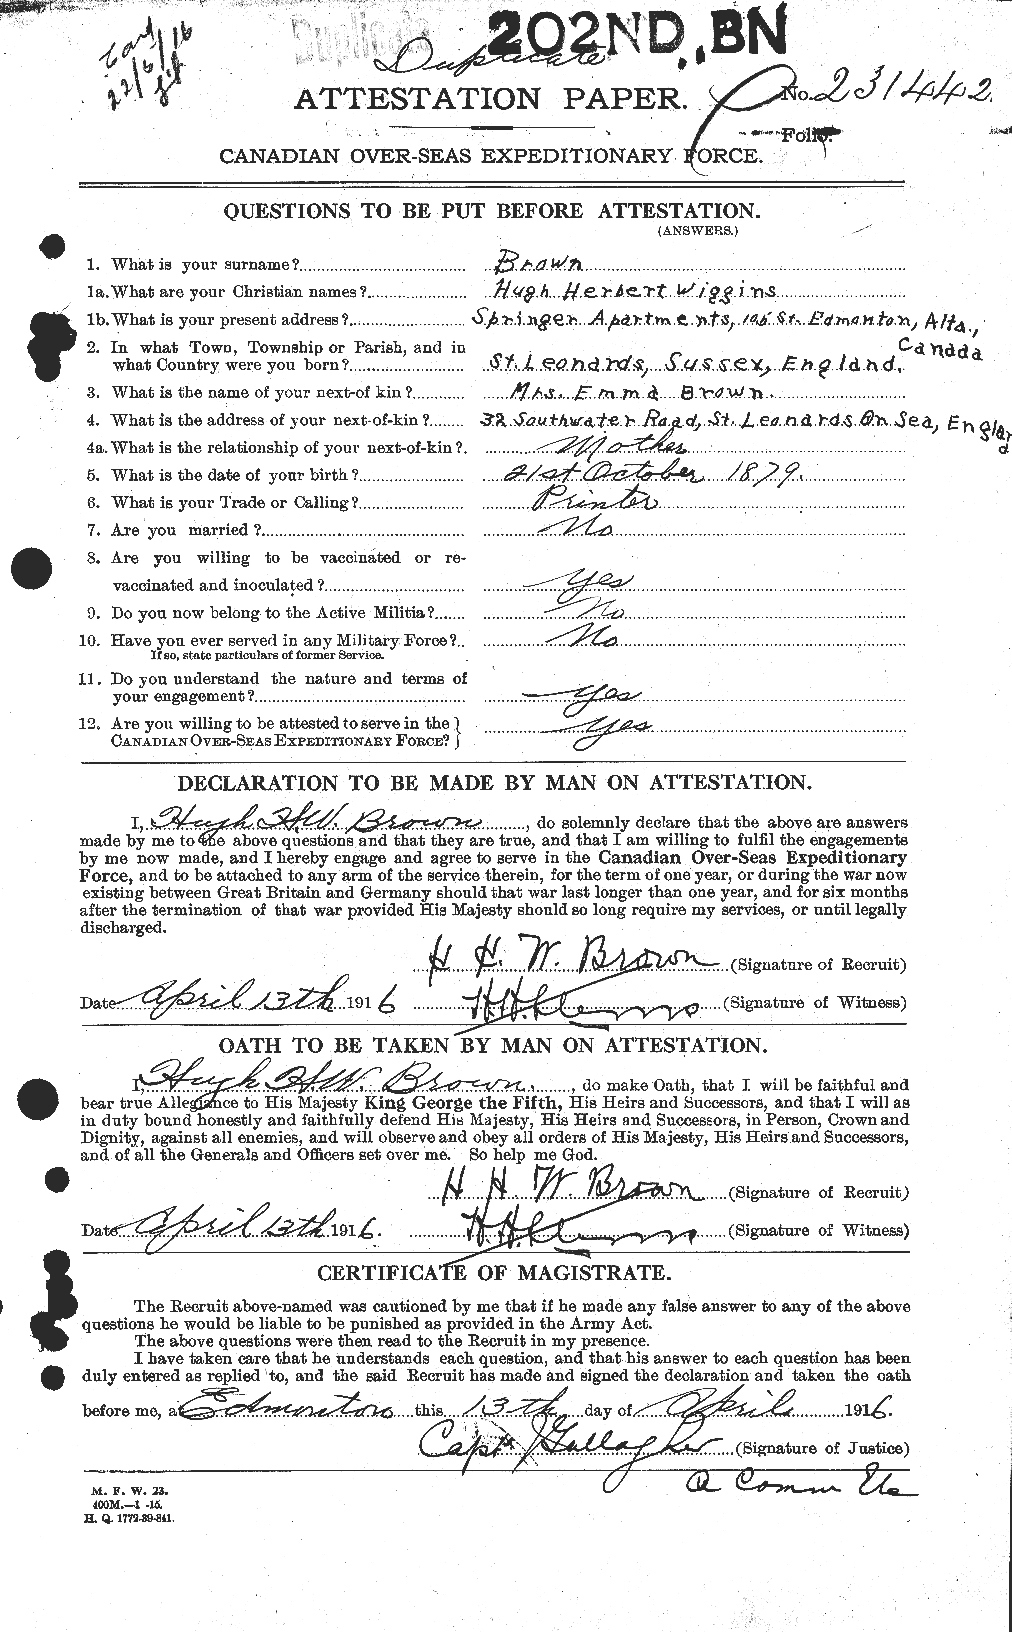 Personnel Records of the First World War - CEF 265649a